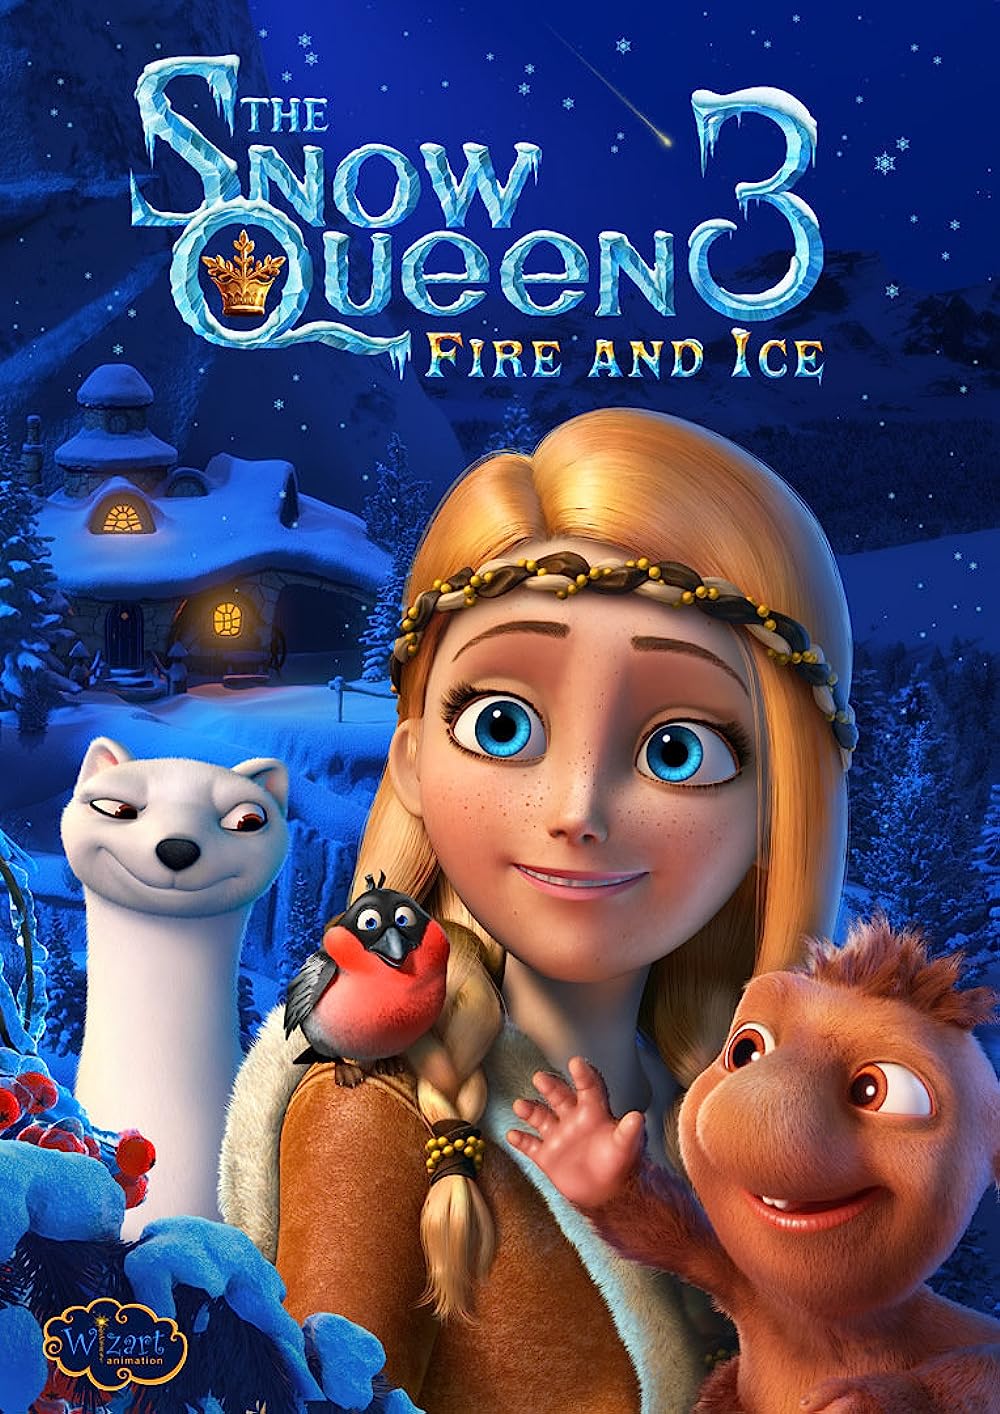 The Snow Queen 3 Fire and Ice 2016 Hindi ORG Dual Audio 1080p-720p-480p BluRay ESub Download